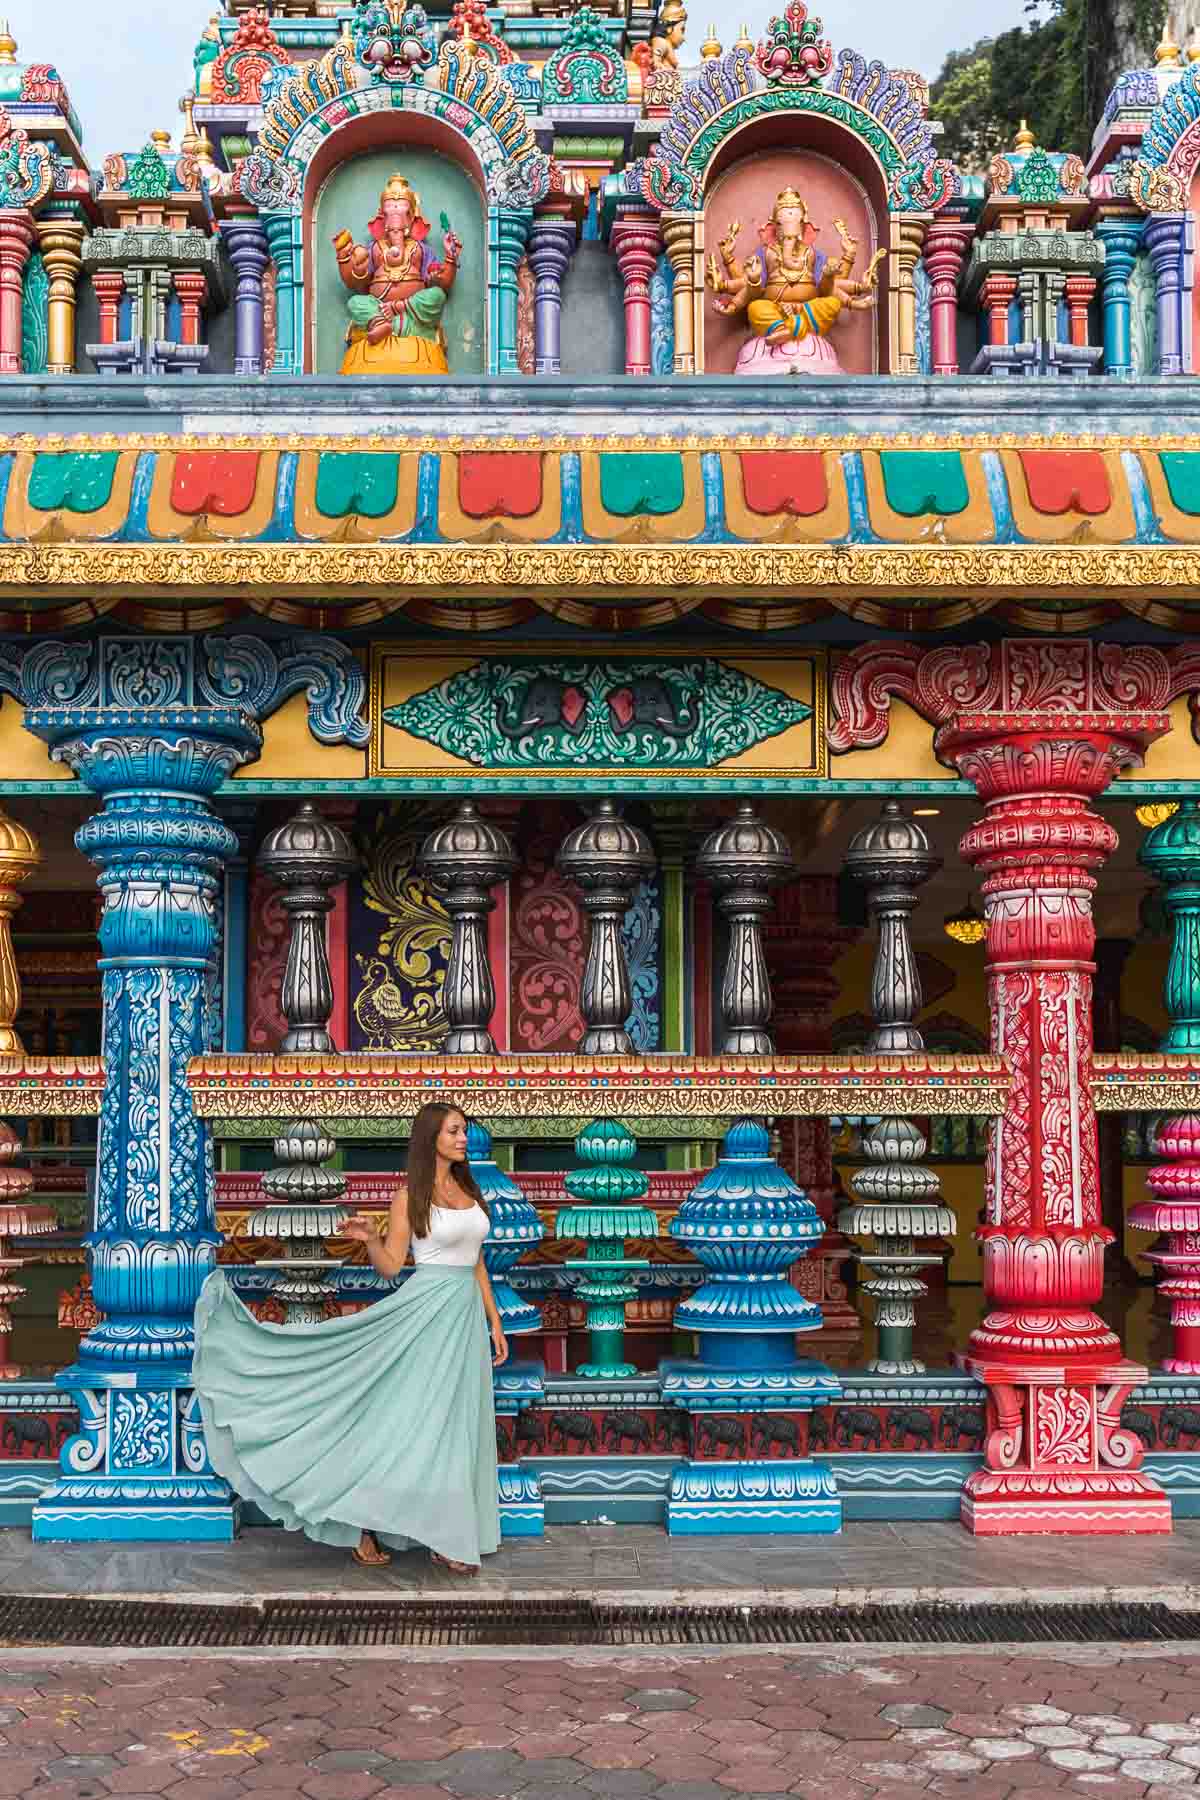 Girl in a blue skirt standing in front of the colorful columns at the Batu Caves in Kuala Lumpur, Malaysia